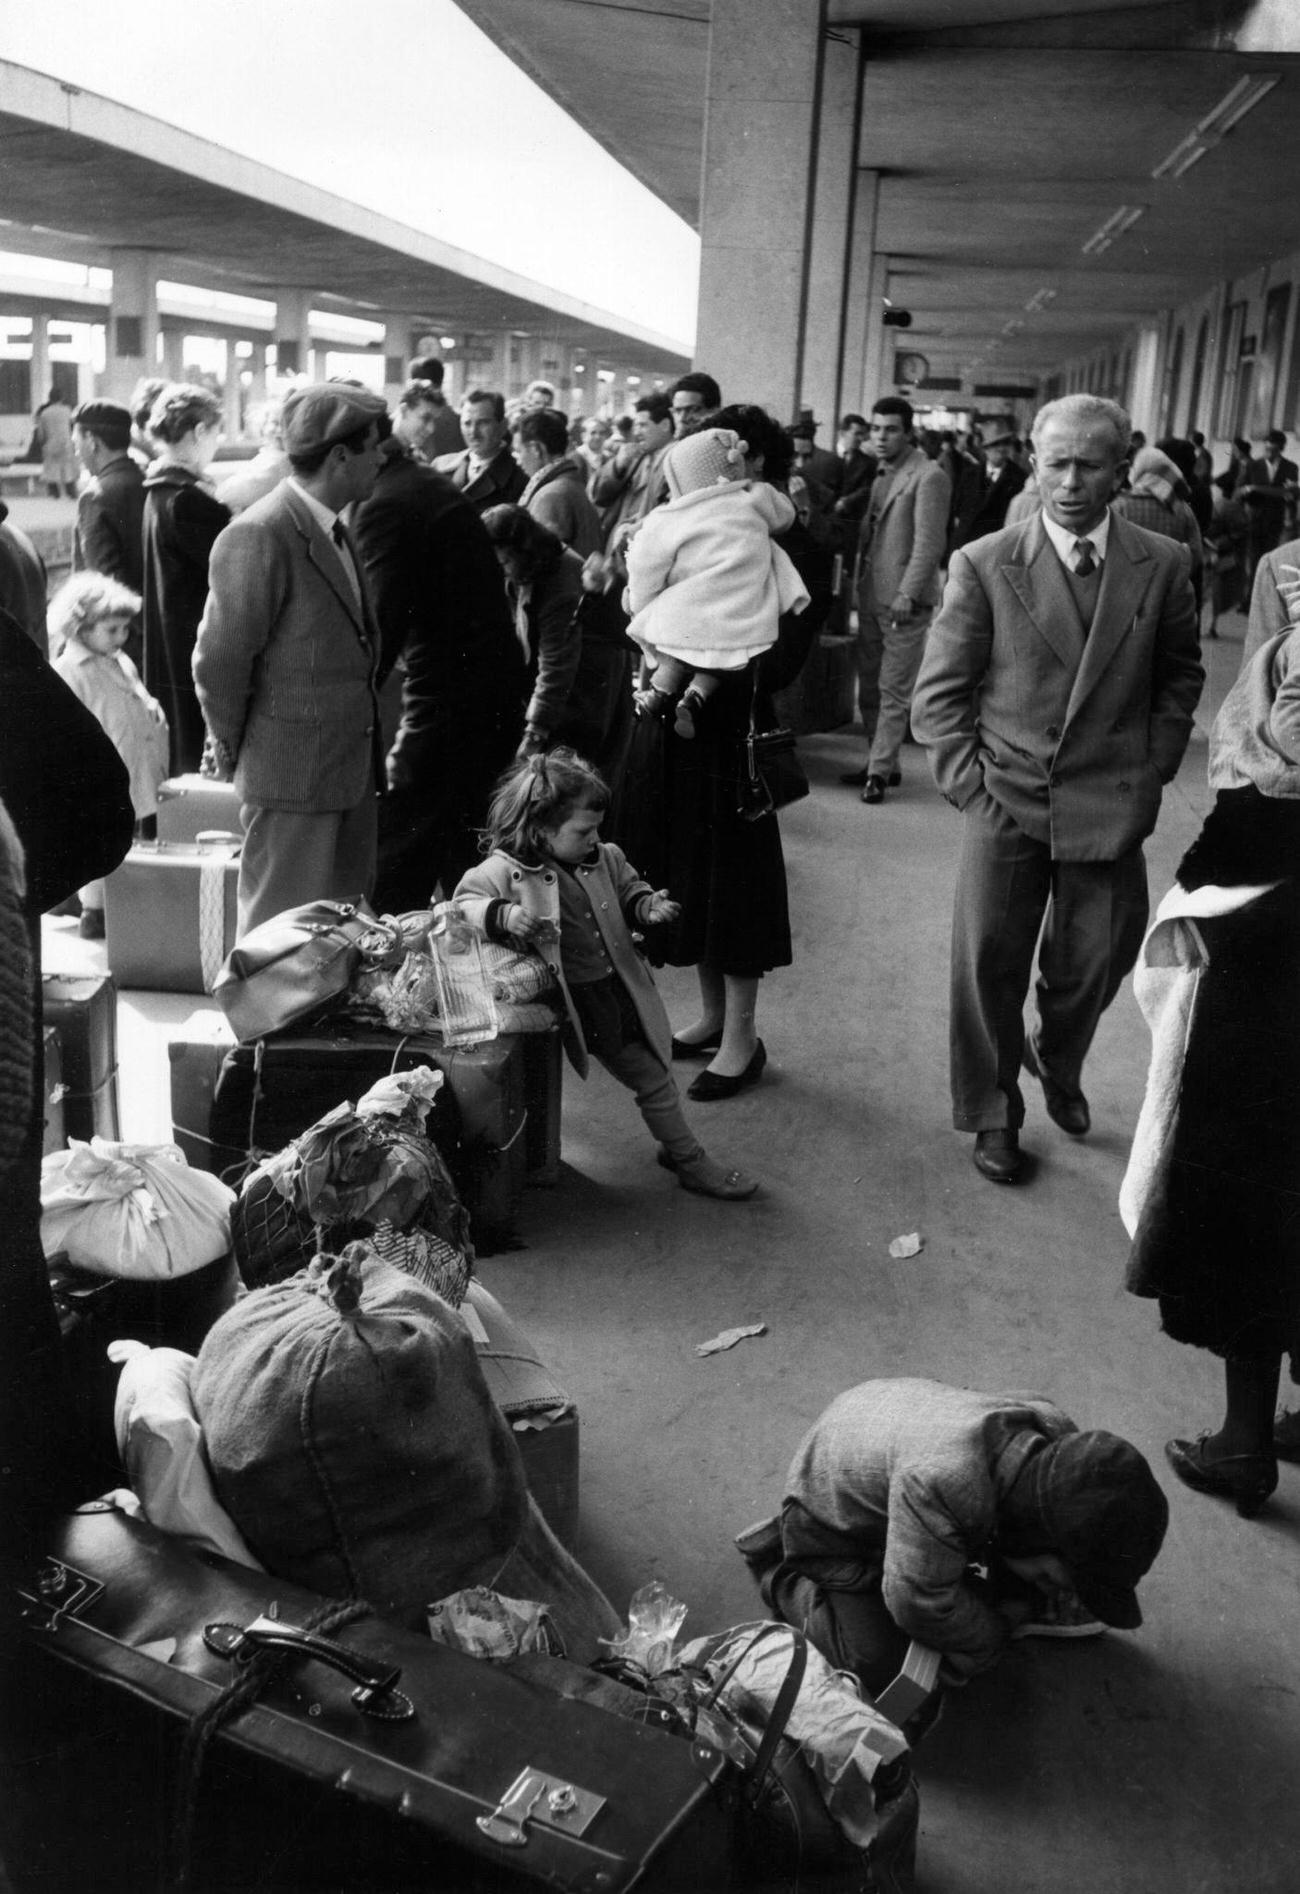 Families of emigrants with packs and luggage waiting for a train at the railway station. Catania, March 1958